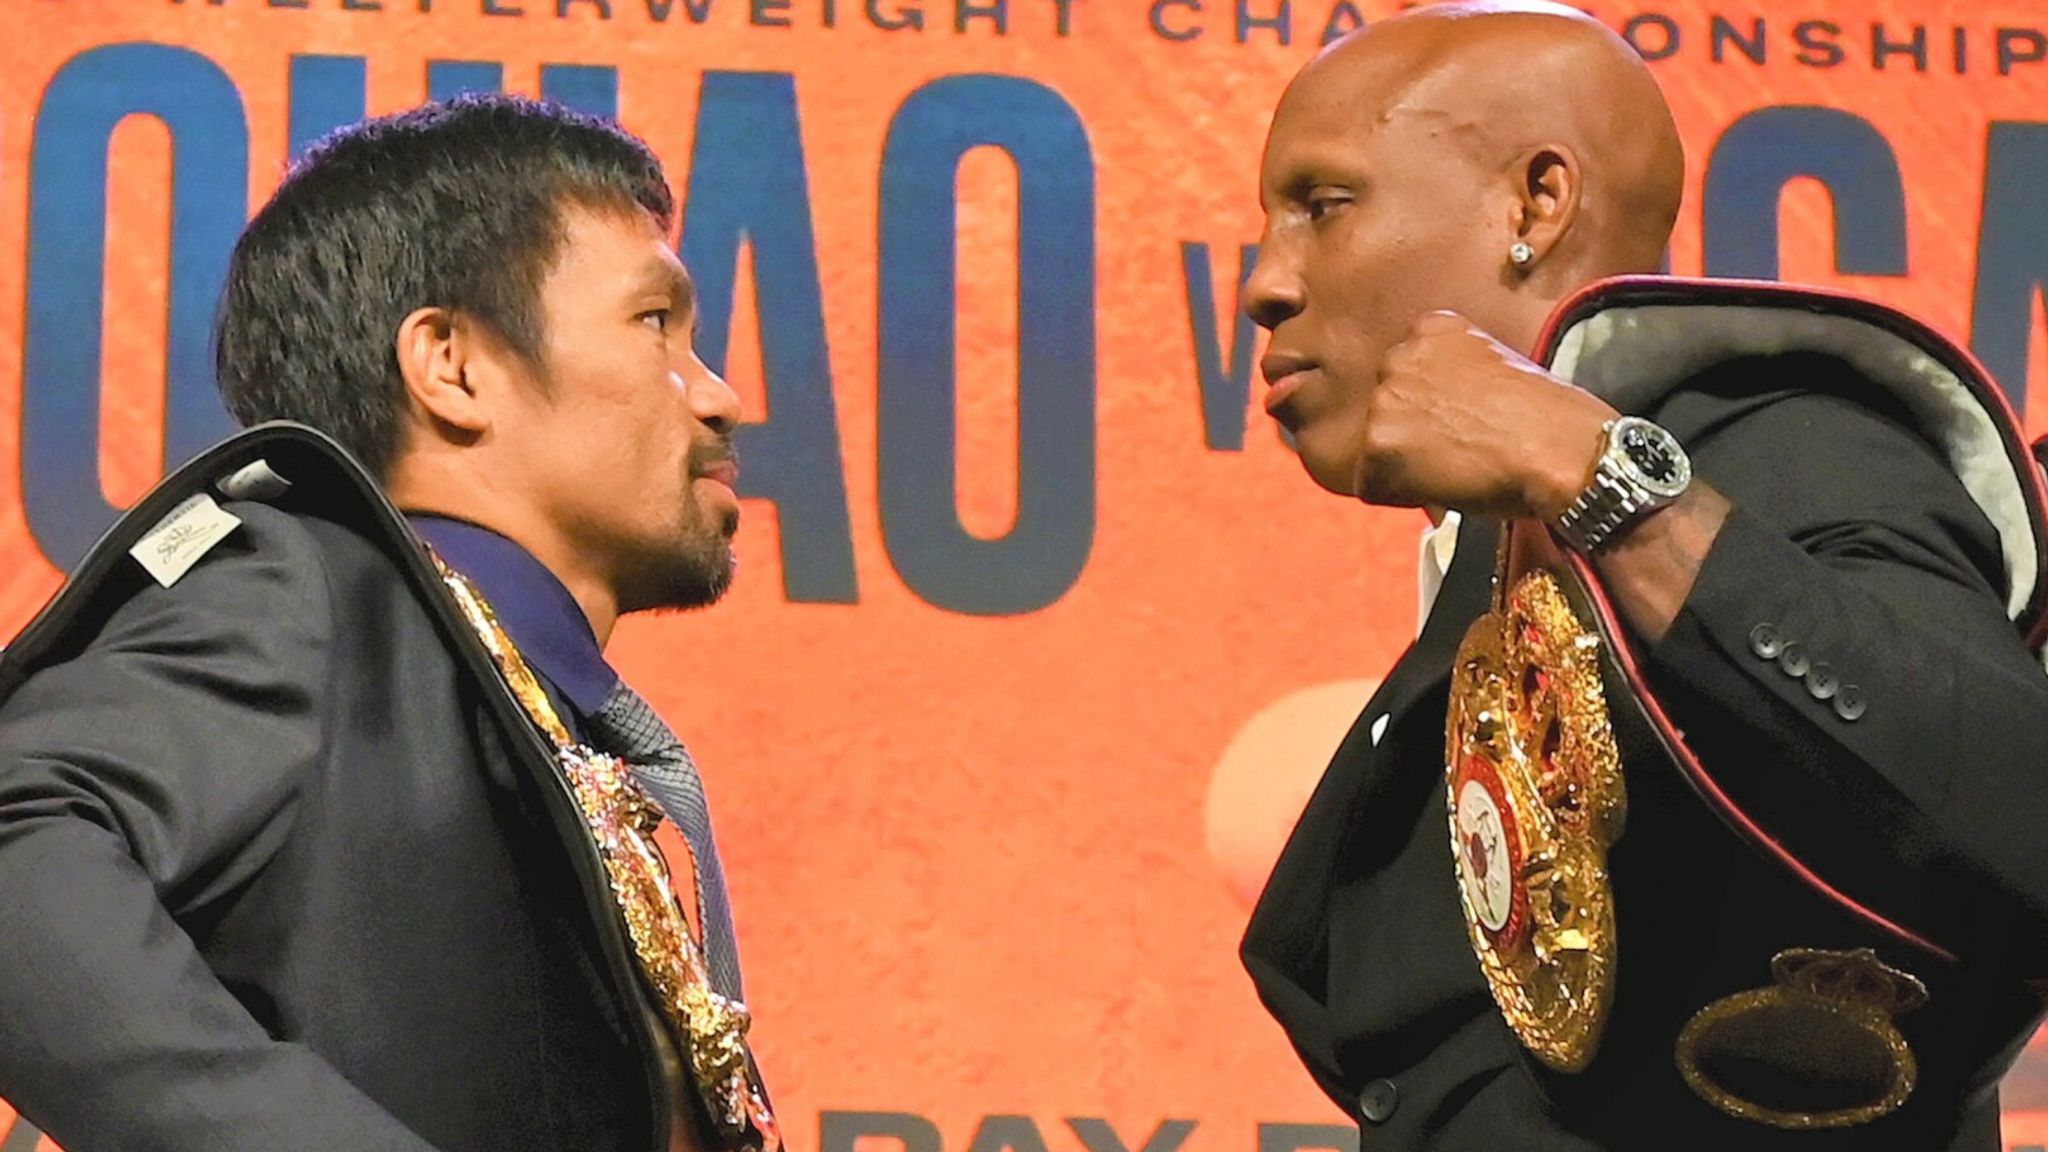 Manny Pacquiao warns Yordenis Ugas that he wants a ruthless knockout win after the Cuban